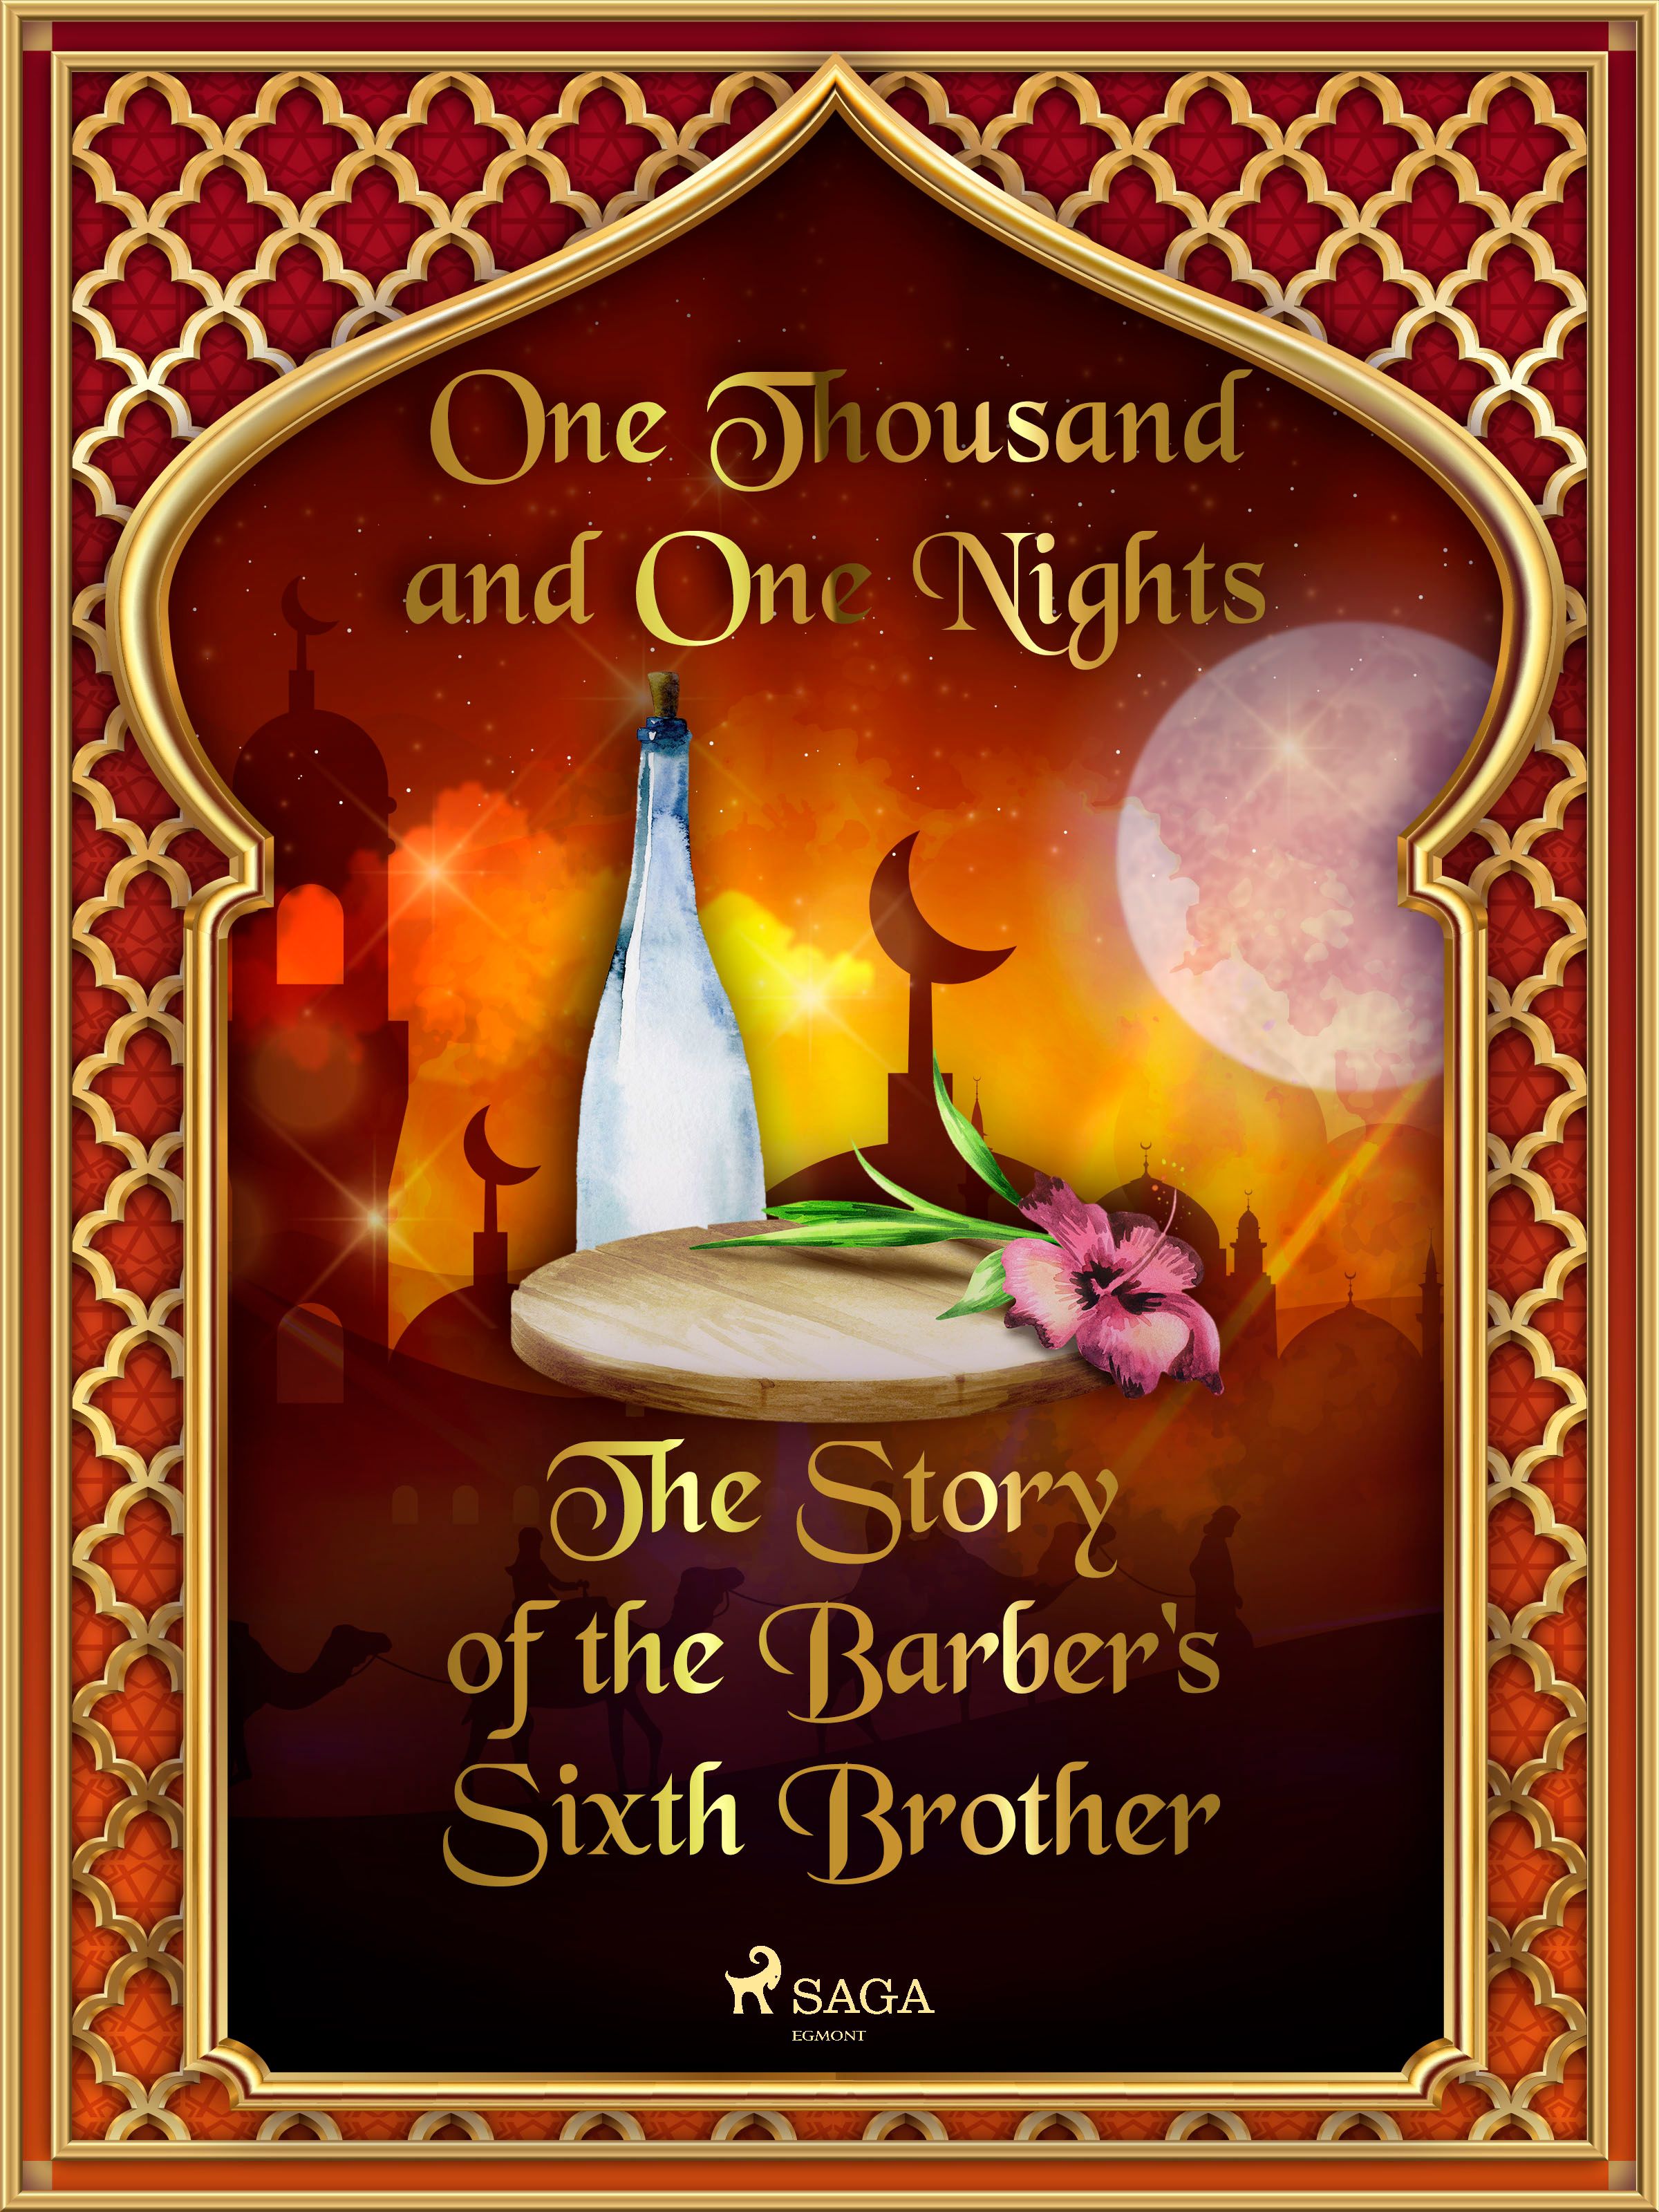 The Story of the Barber's Sixth Brother, e-bog af One Thousand and One Nights